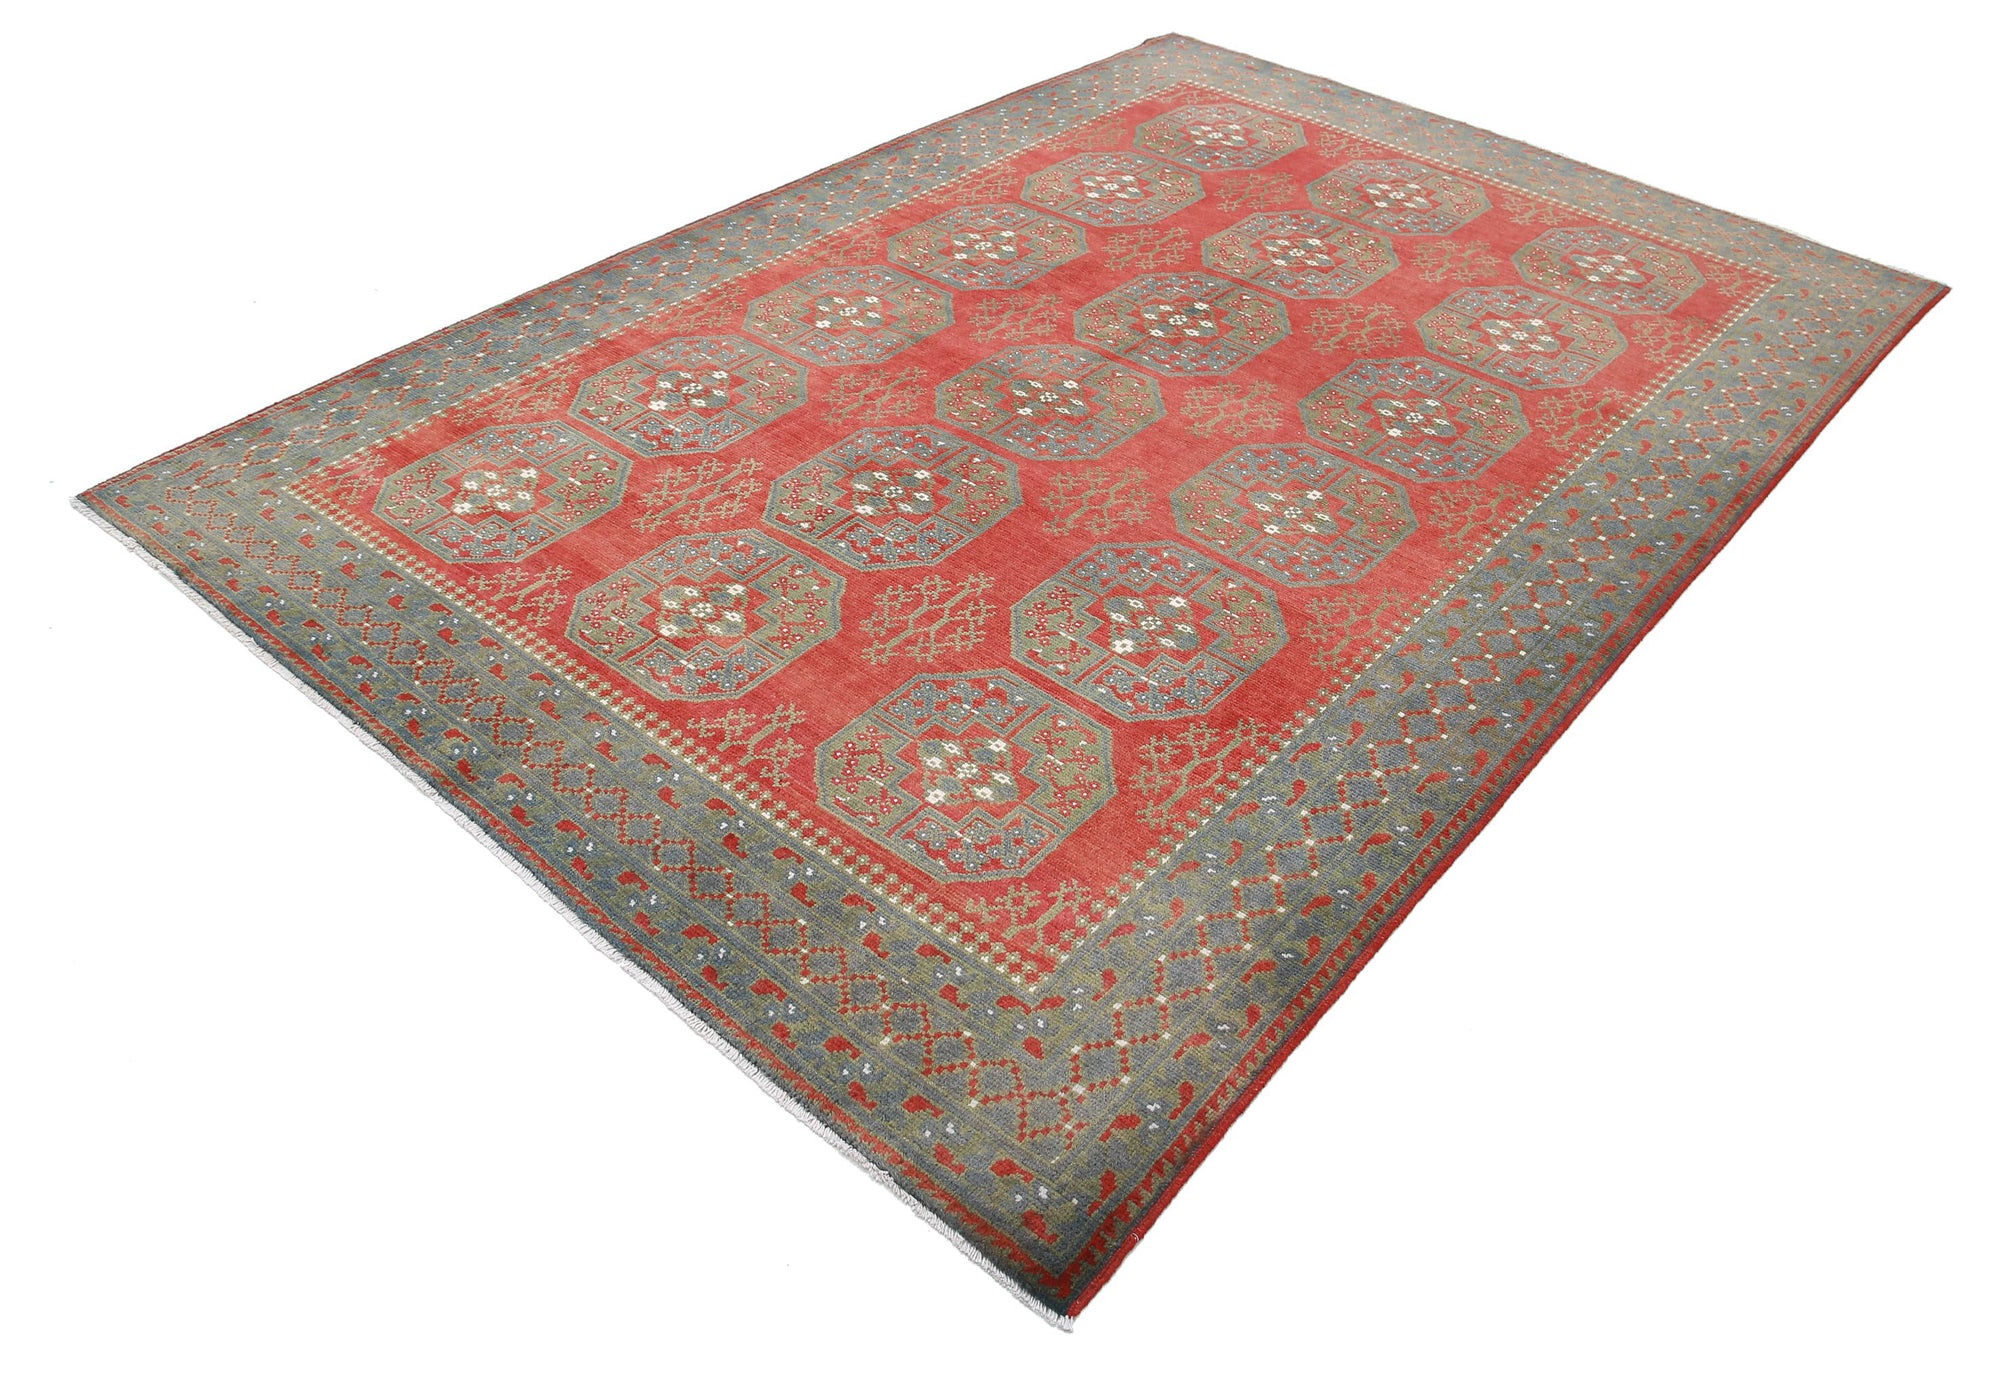 Revival-hand-knotted-gul-collection-wool-rug-5013954-2.jpg